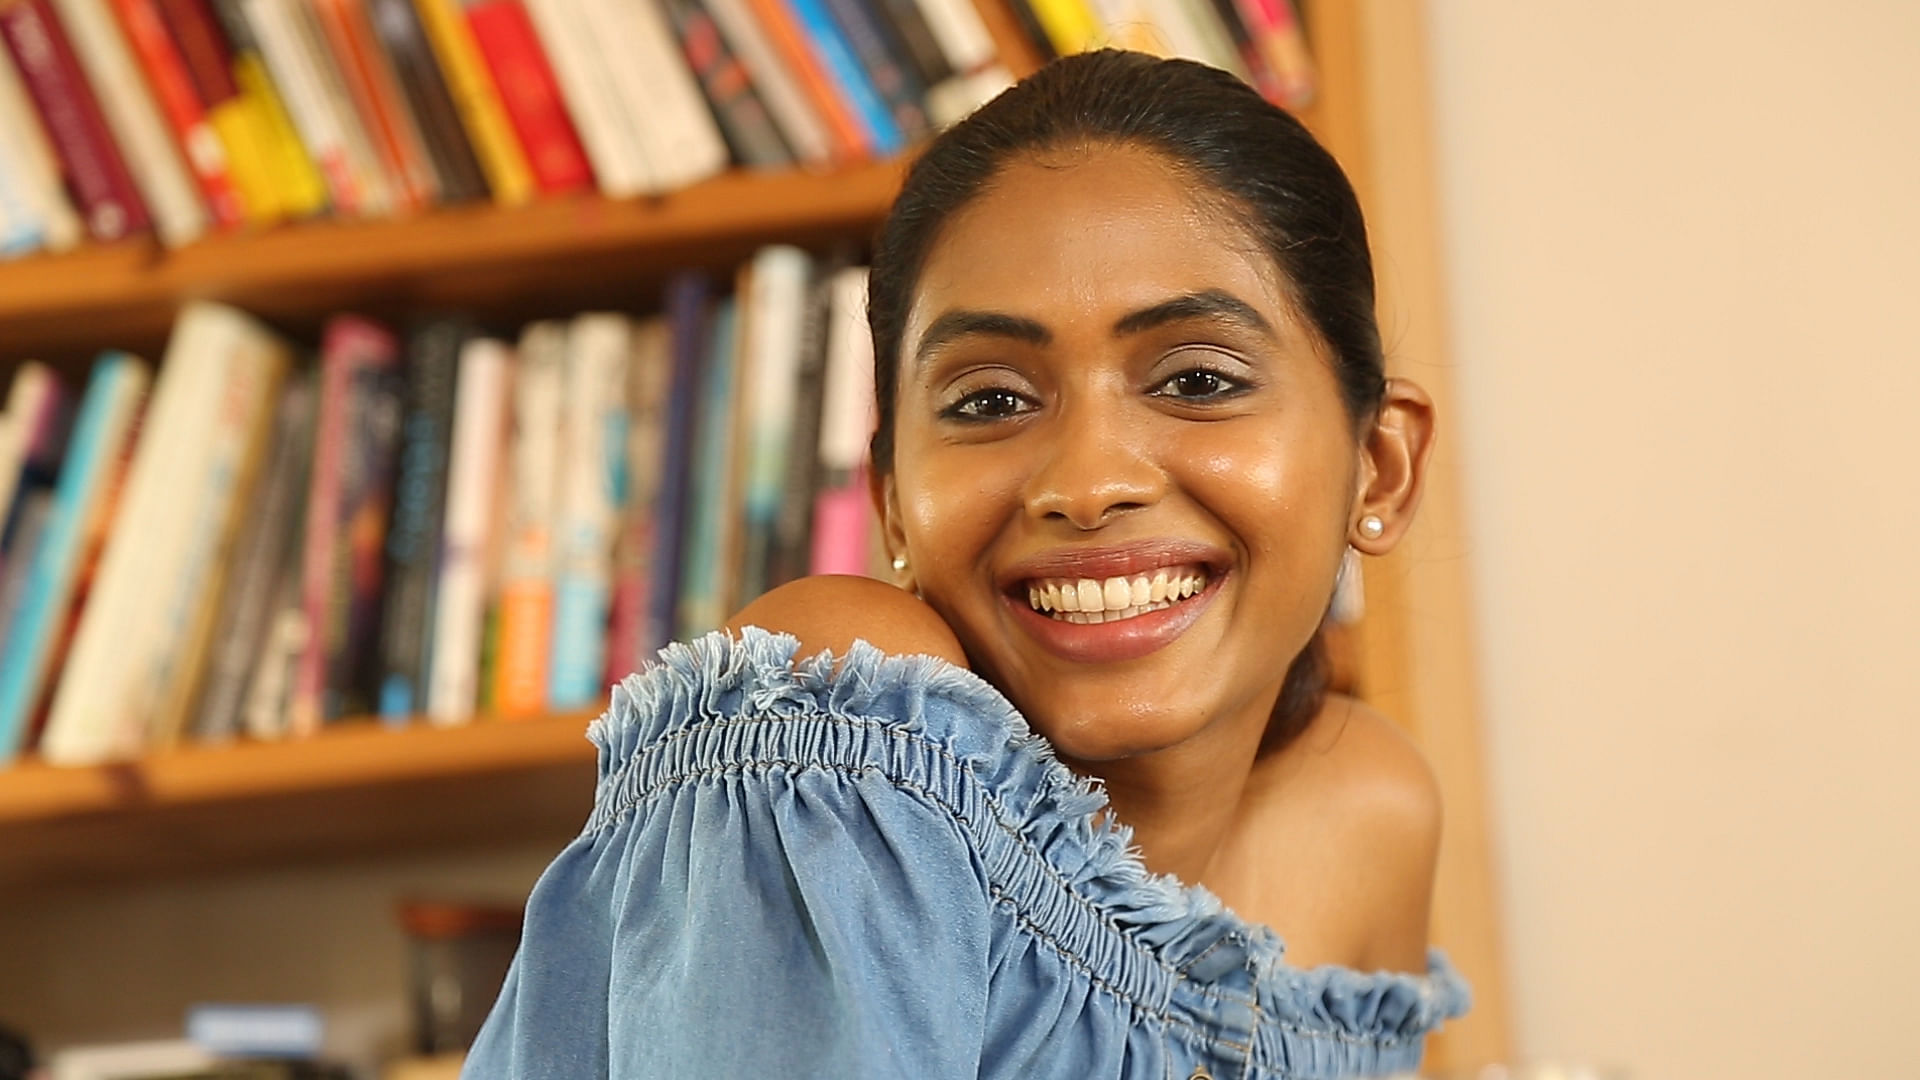 Anjali Patil shares her journey of being a dusky girl in a fair and lovely society.